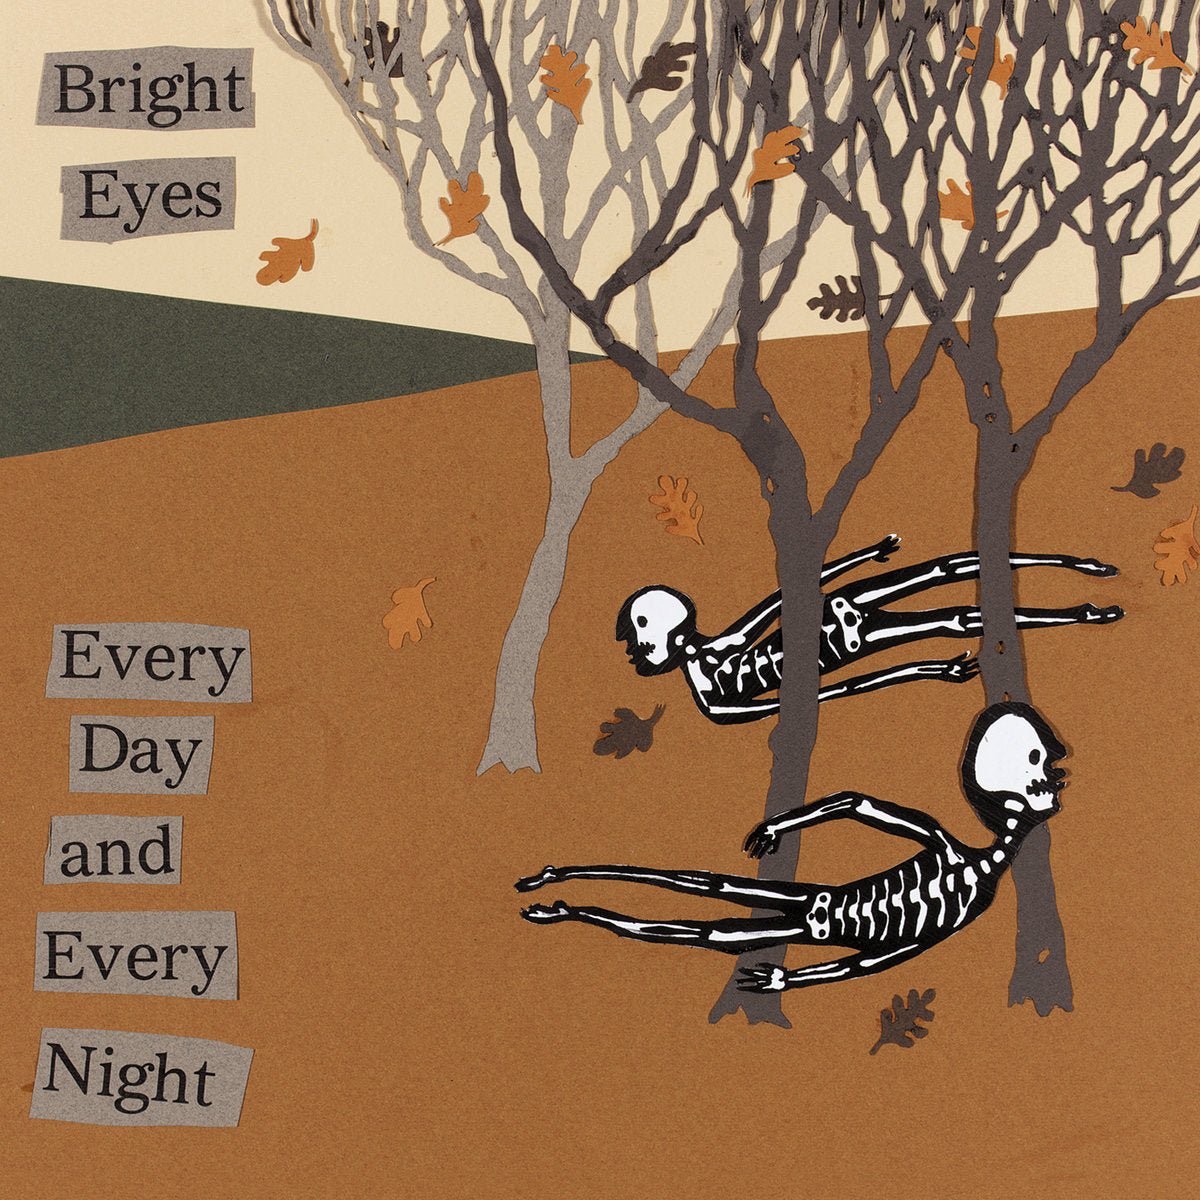 Bright Eyes - Every Day and Every Night 12" - Vinyl - Saddle Creek